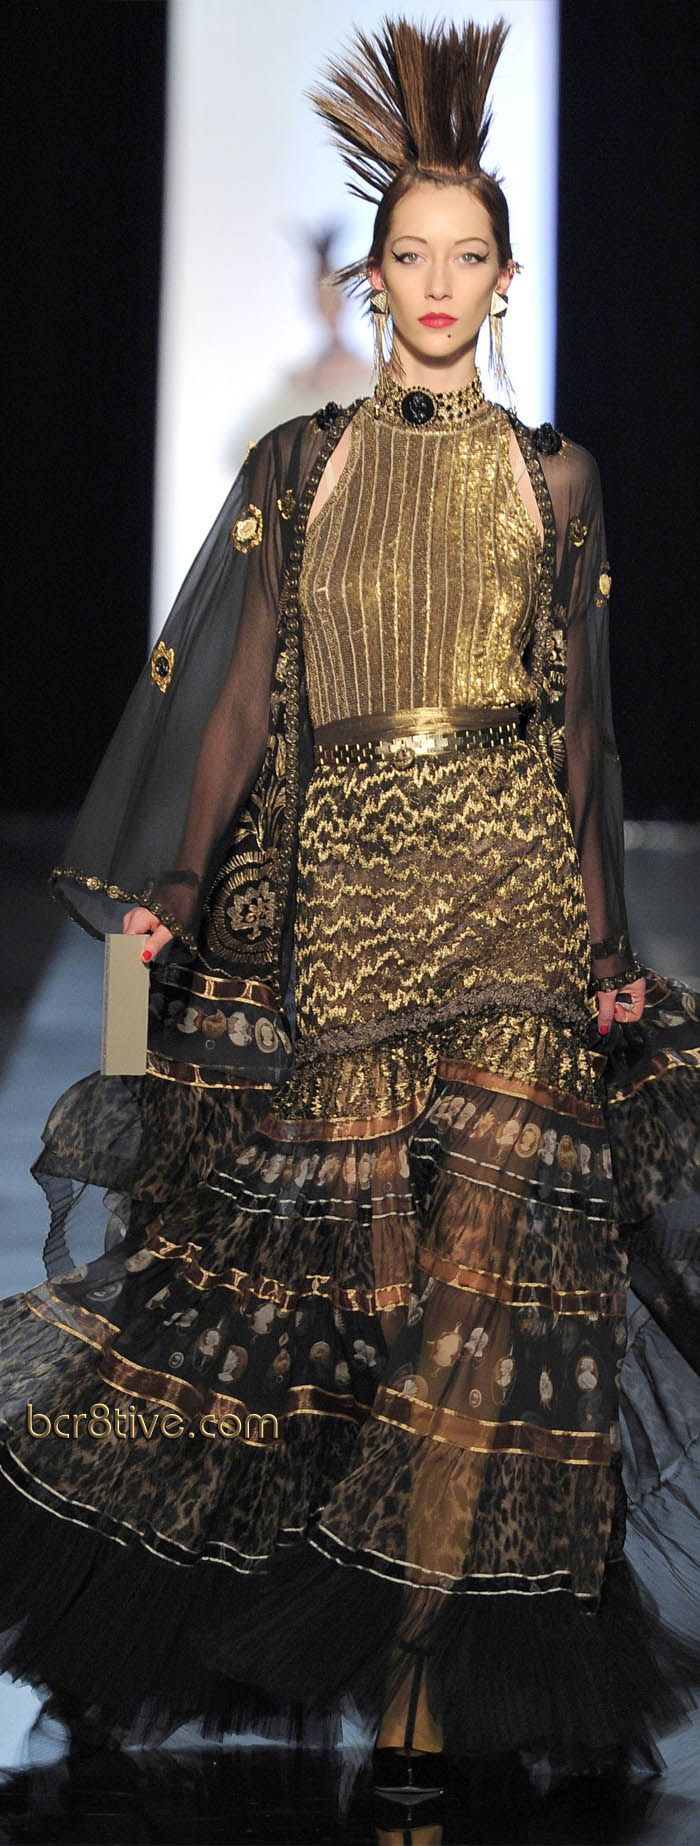 Jean Paul Gaultier Haute Couture Spring Summer 2011 – Be Creative